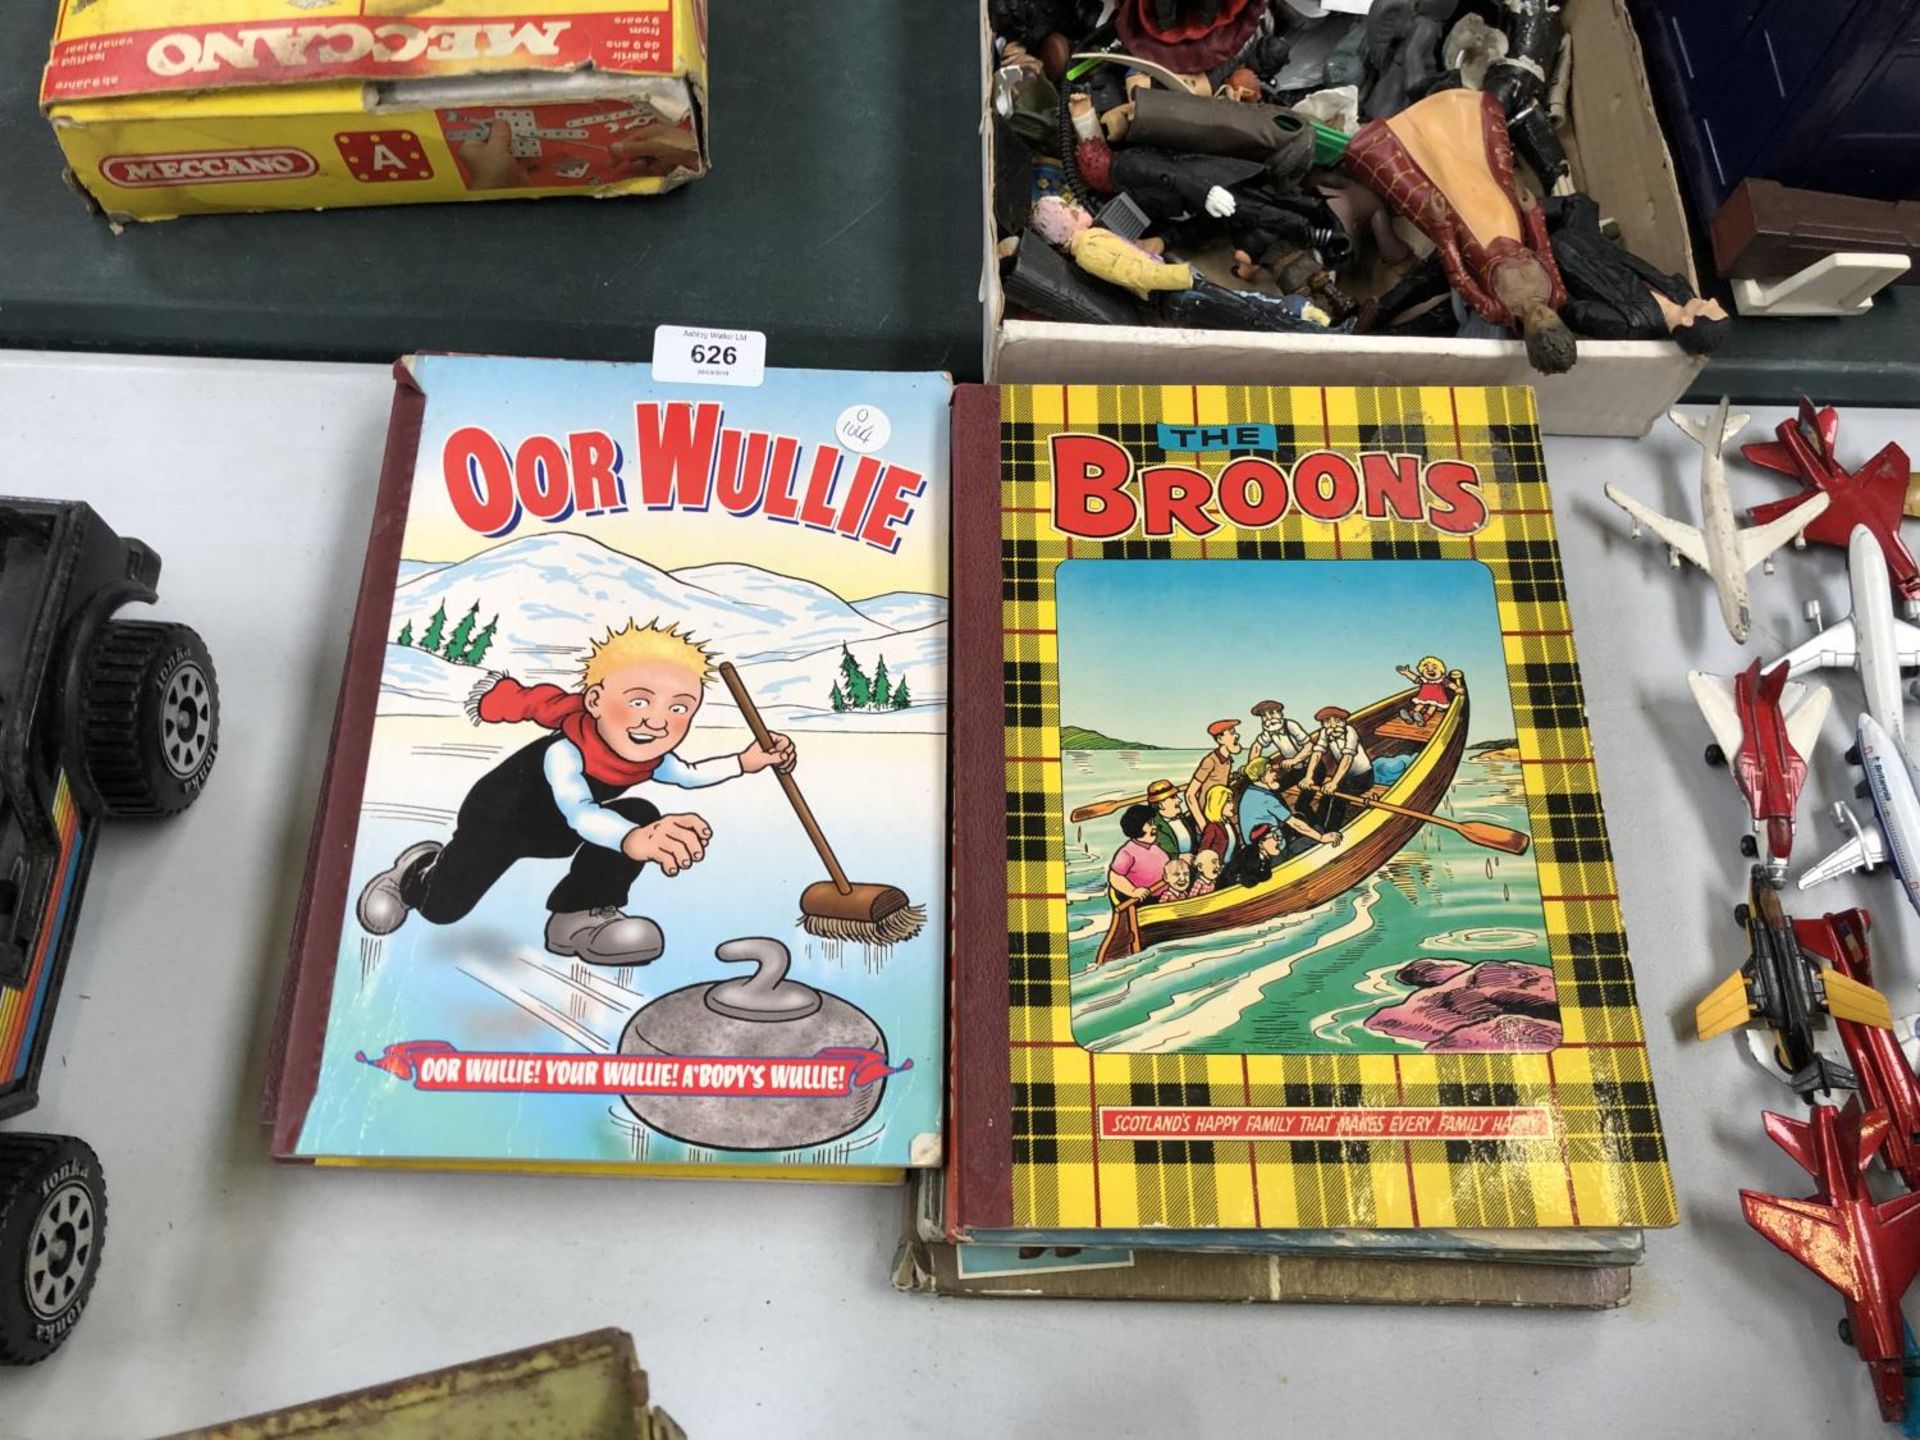 A MIXED GROUP OF VINTAGE ANNUALS ETC